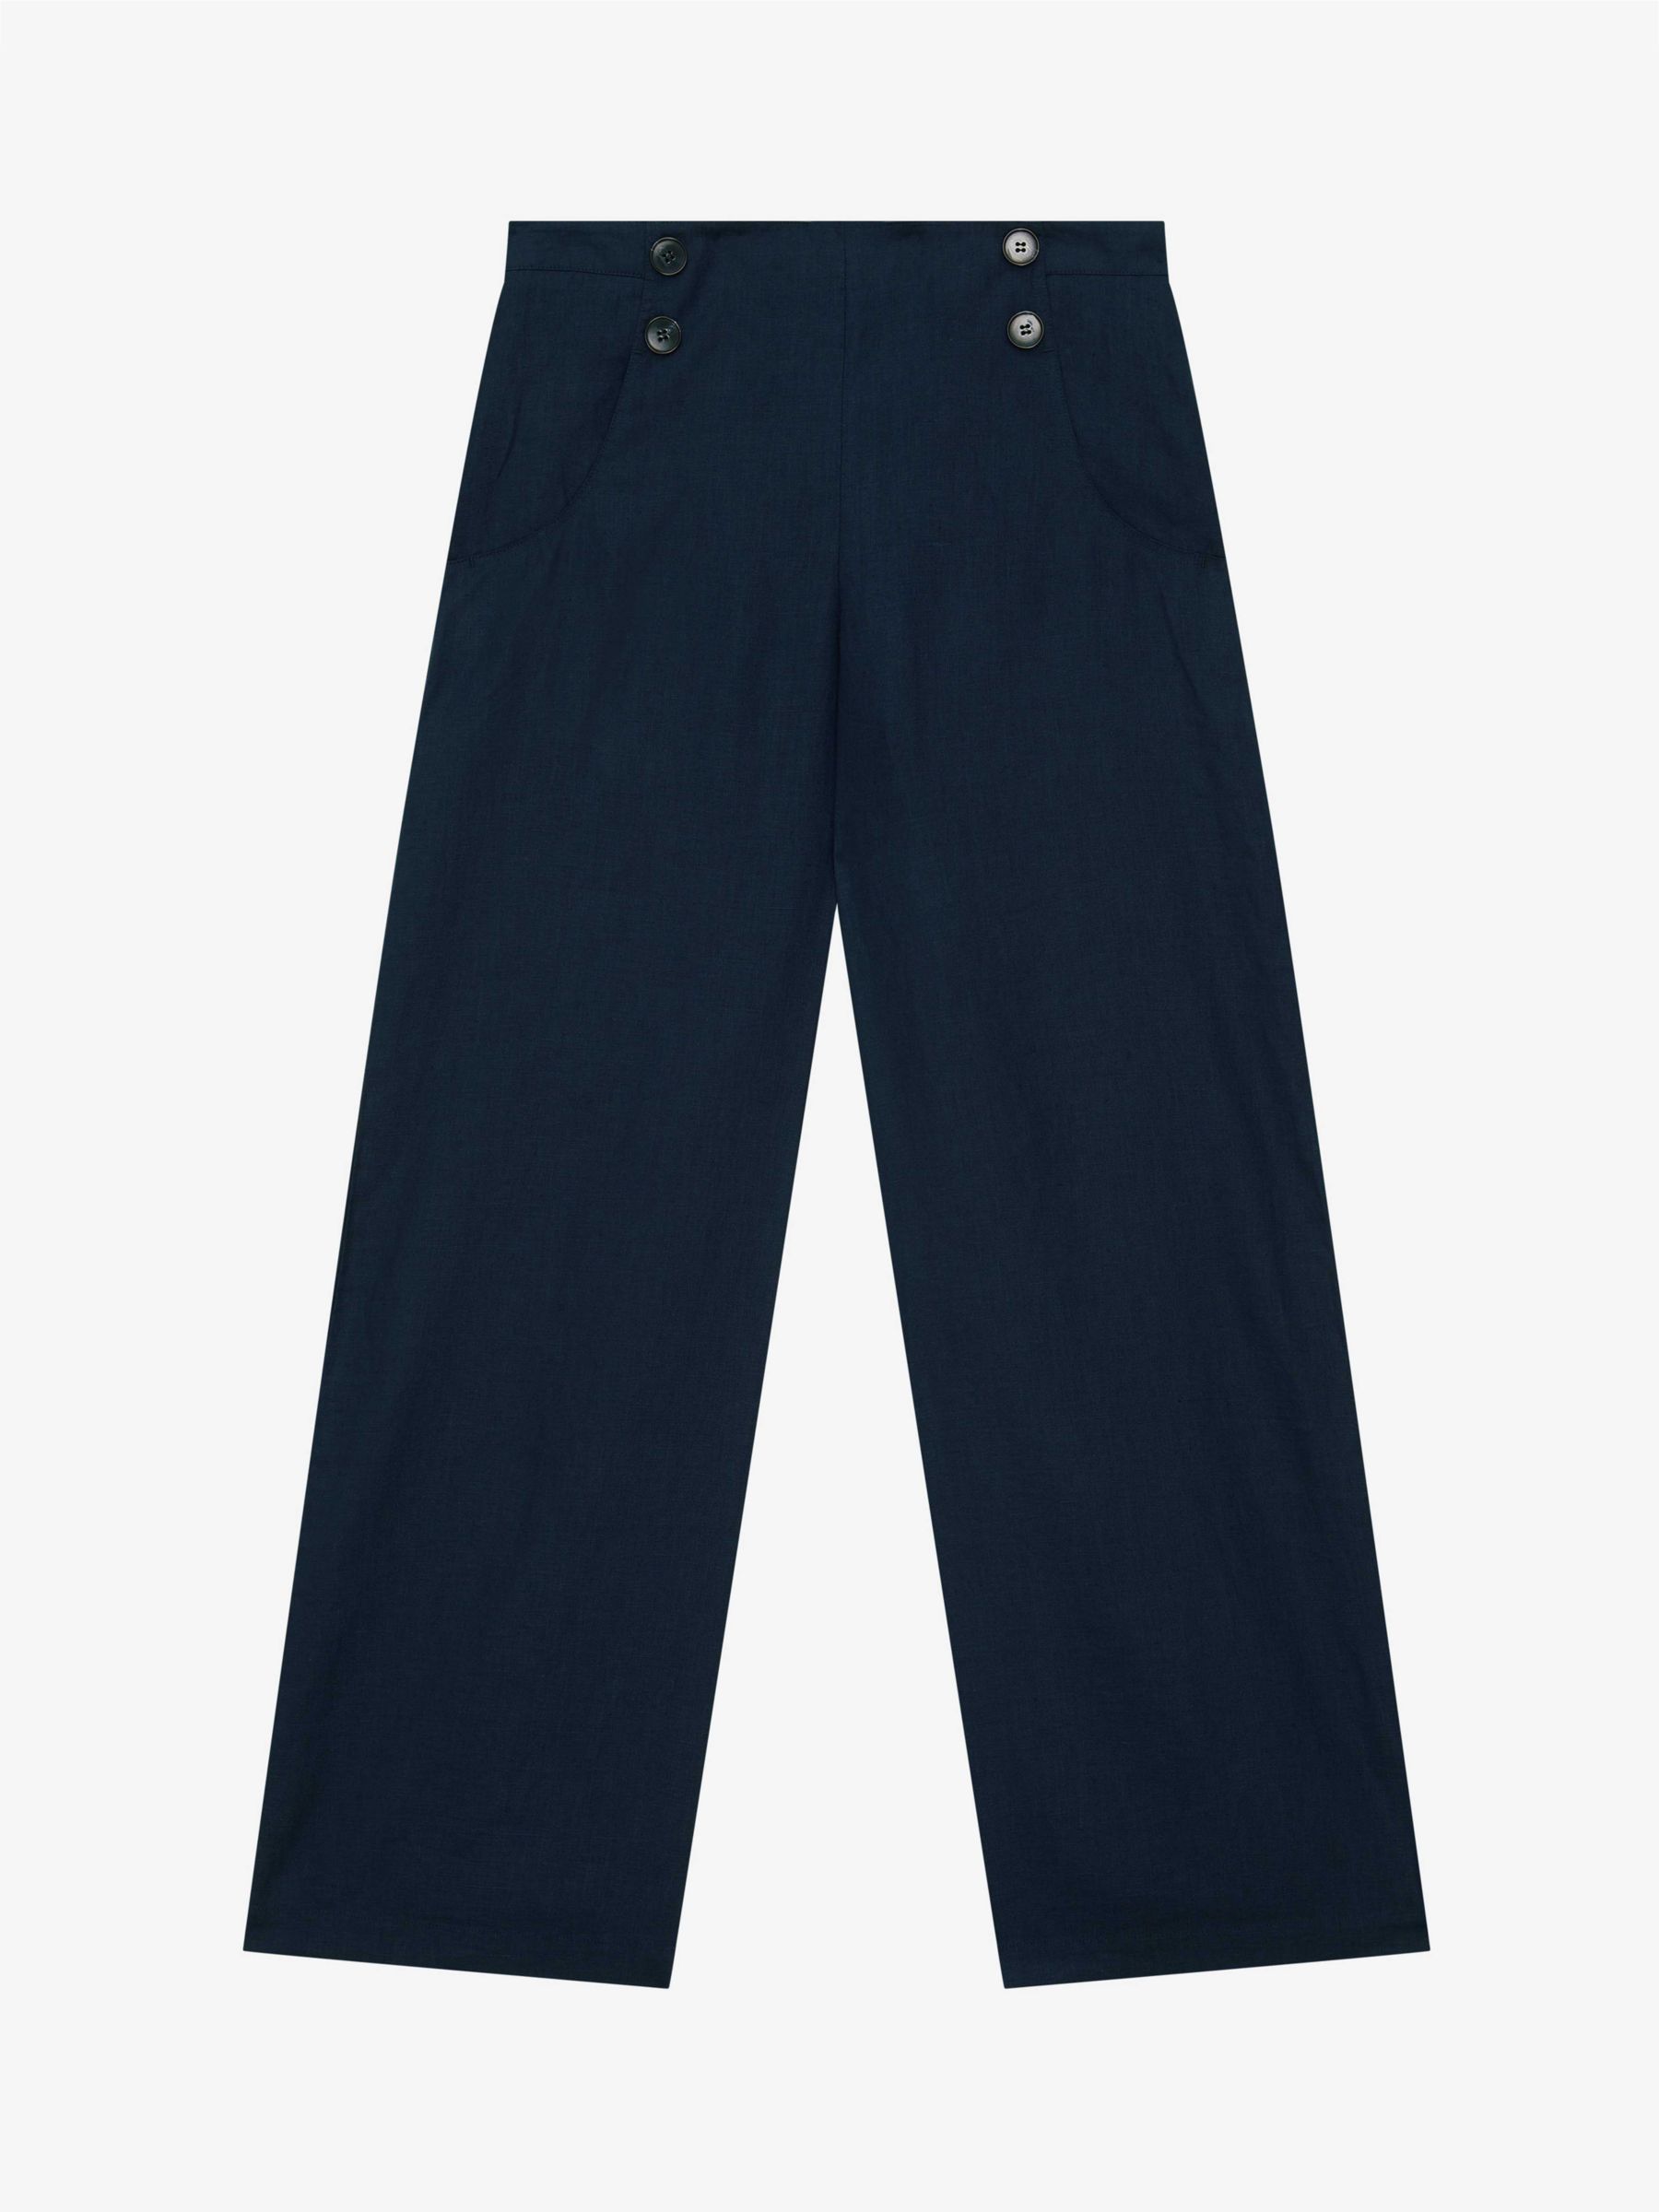 Brora Linen Button Front Trousers, Navy, 6